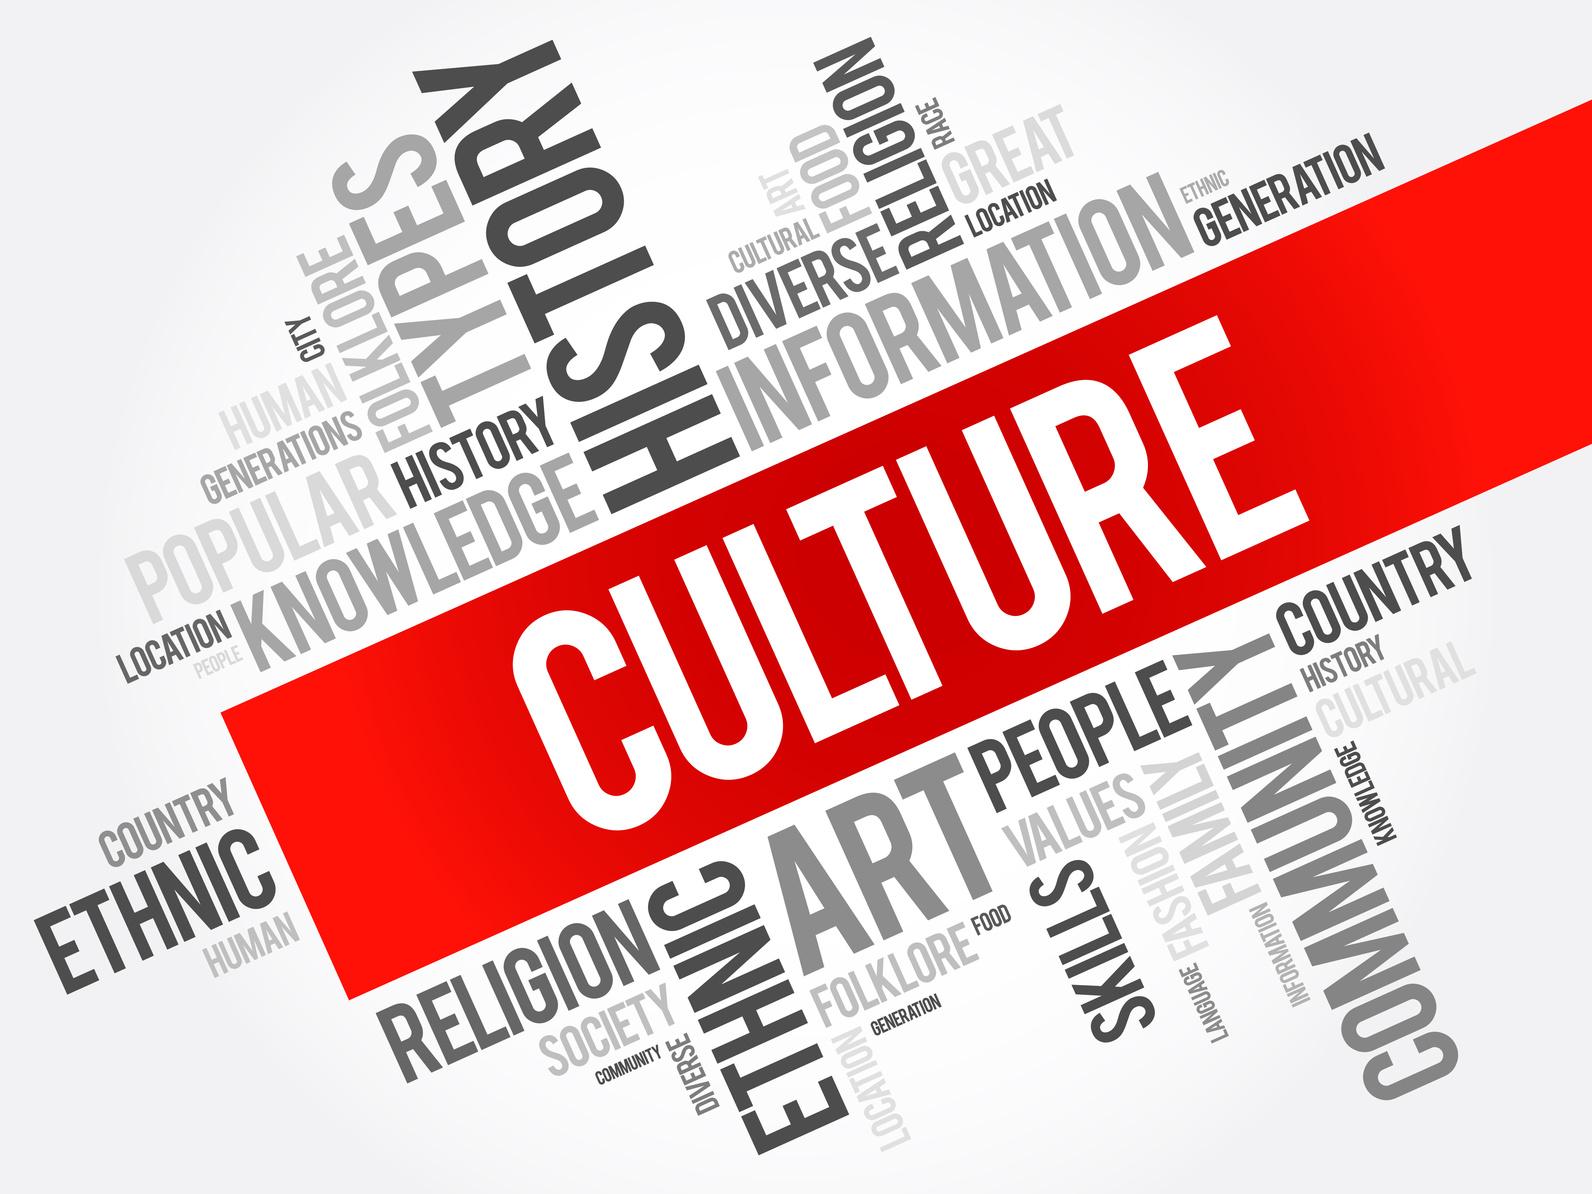 does culture influence personality